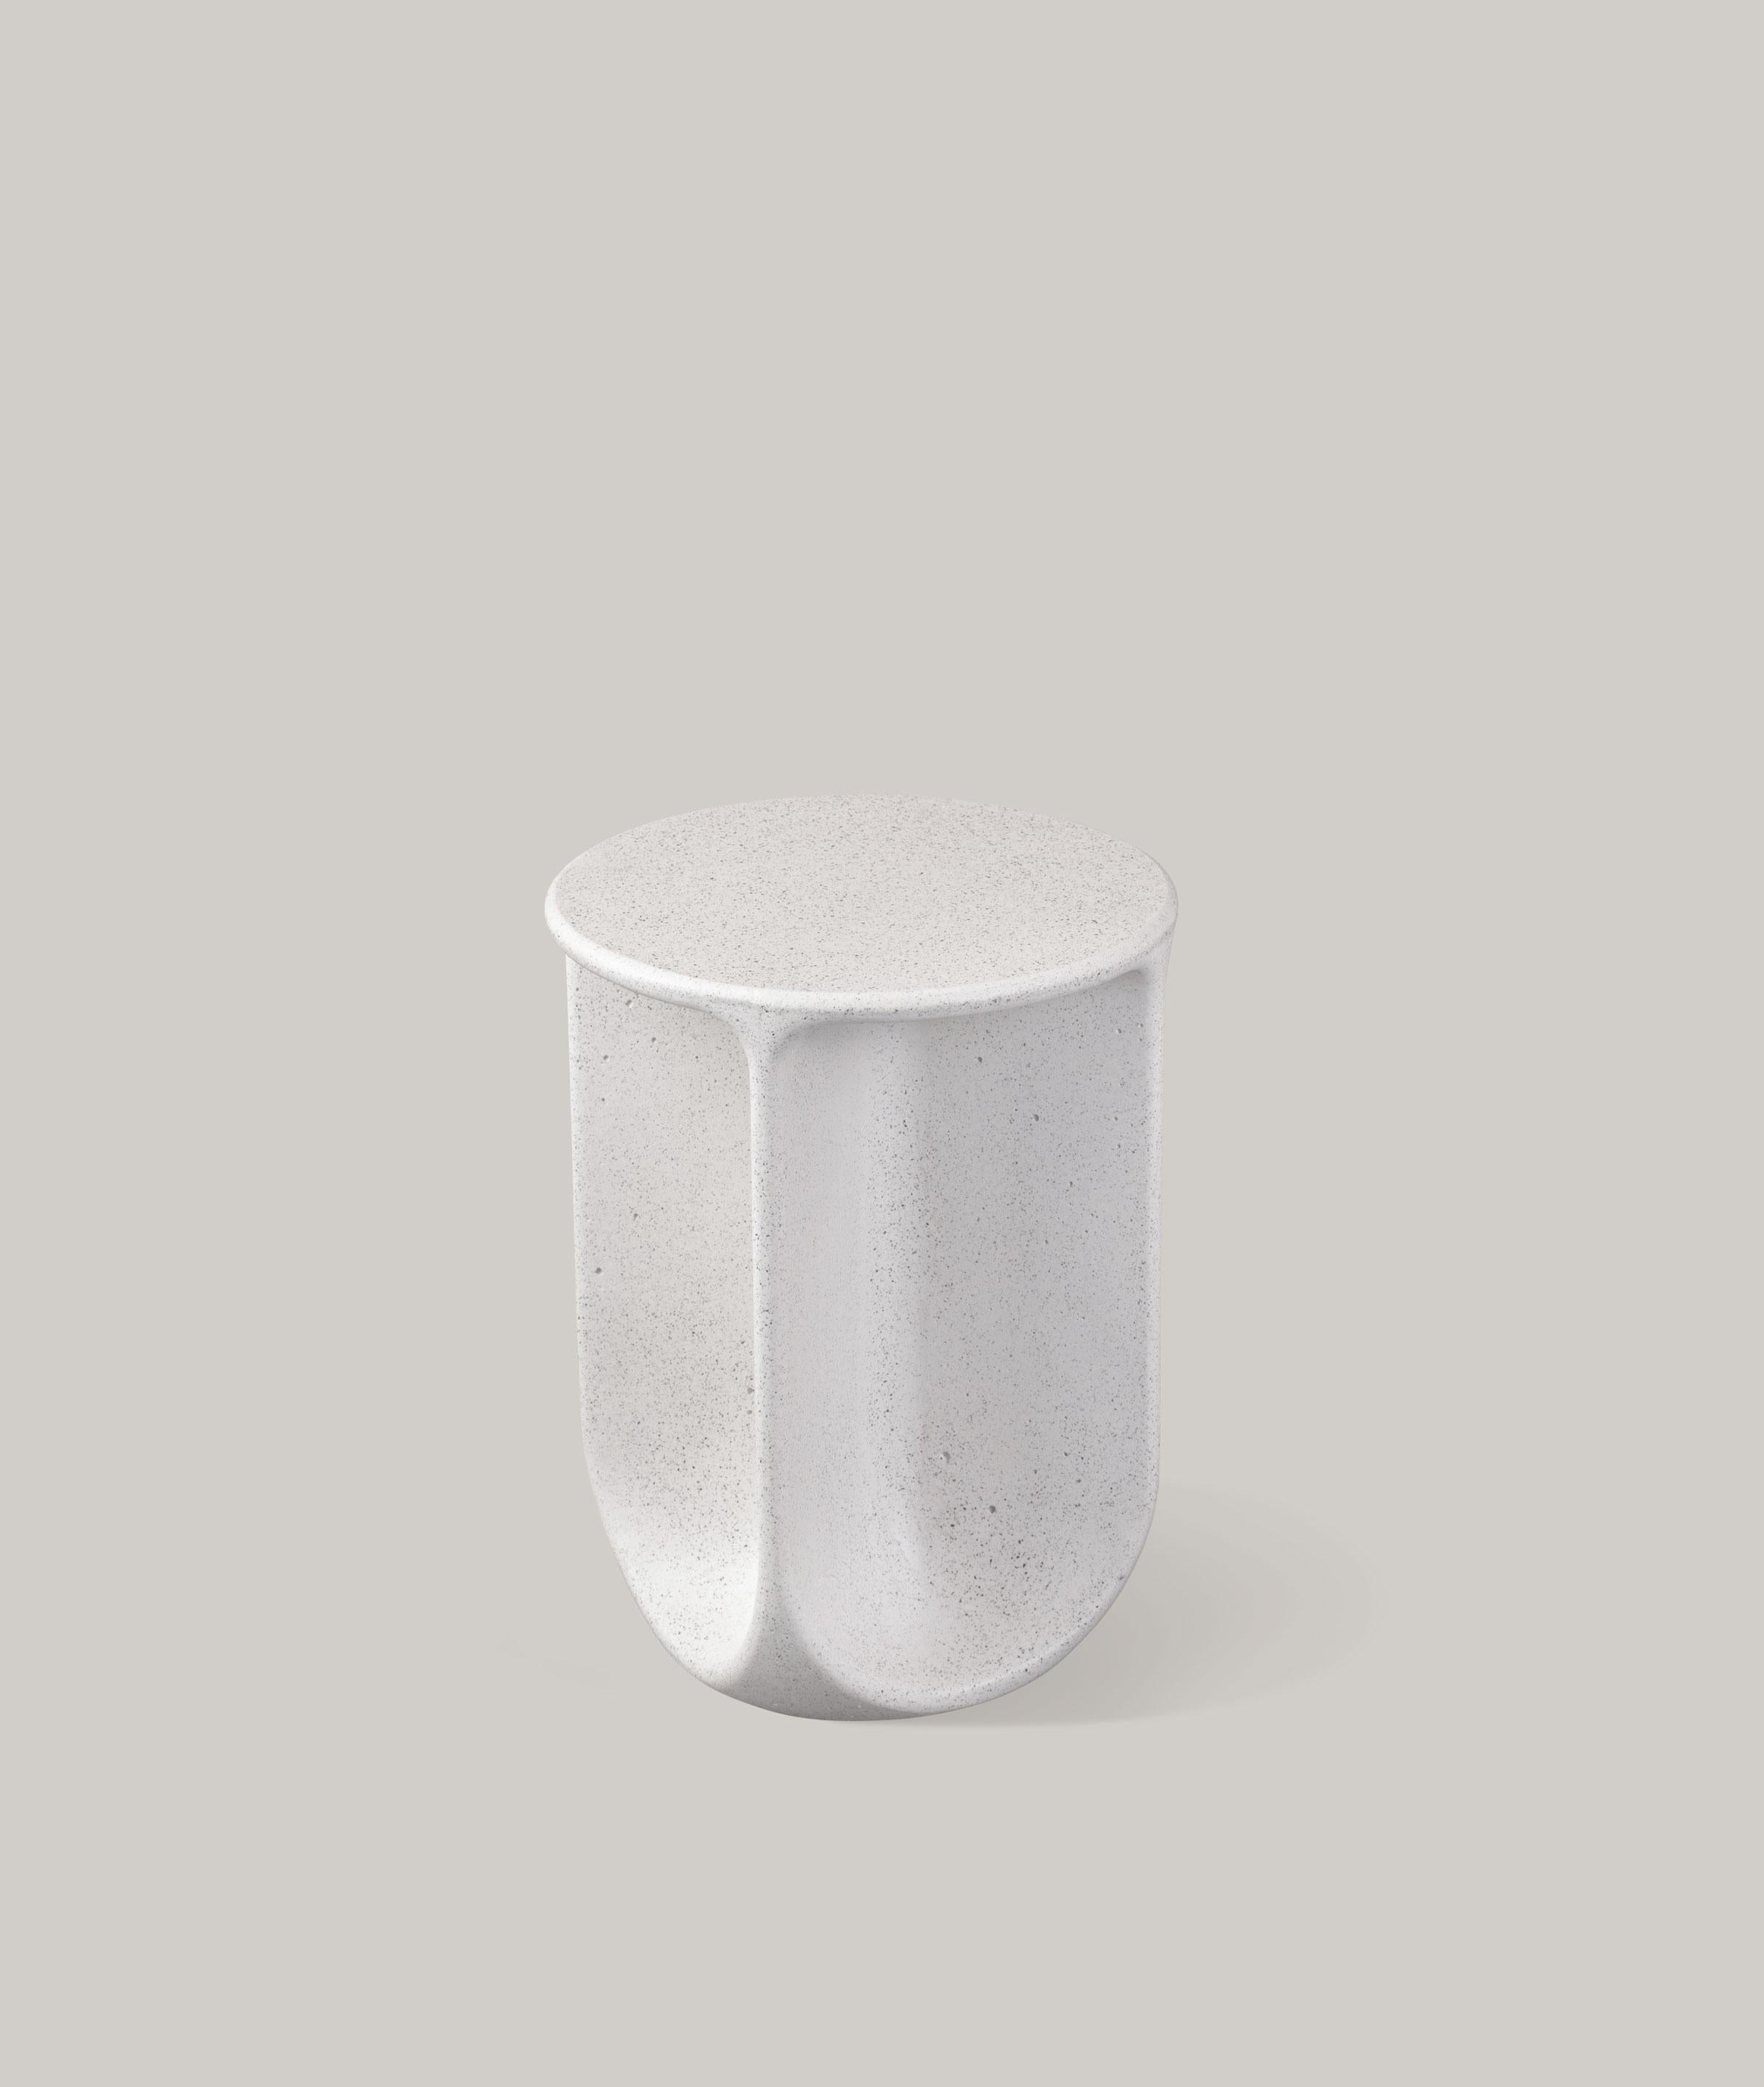 In Pinto, fragments of marble and stone lie beneath a gentle, majestic
surface, combining the gaiety of Venetian soirées with the mystery of primitive shapes. It is made using a fully recyclable and reusable cement, a contemporary material that can